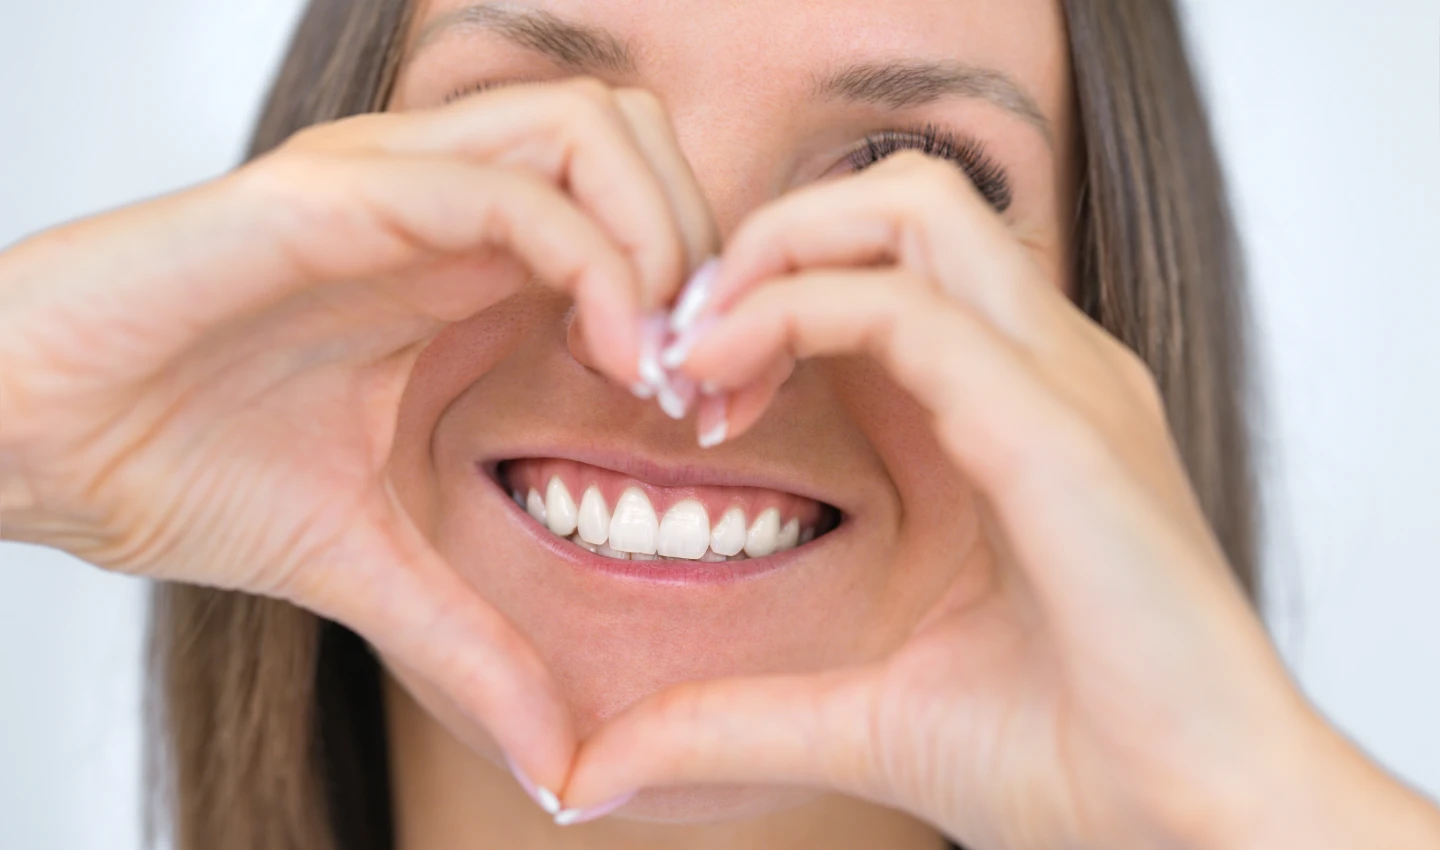 A woman with a radiant smile, holding heart-shaped hands near her mouth, showcasing her strong and healthy teeth, promoting sugar-free dental gums.